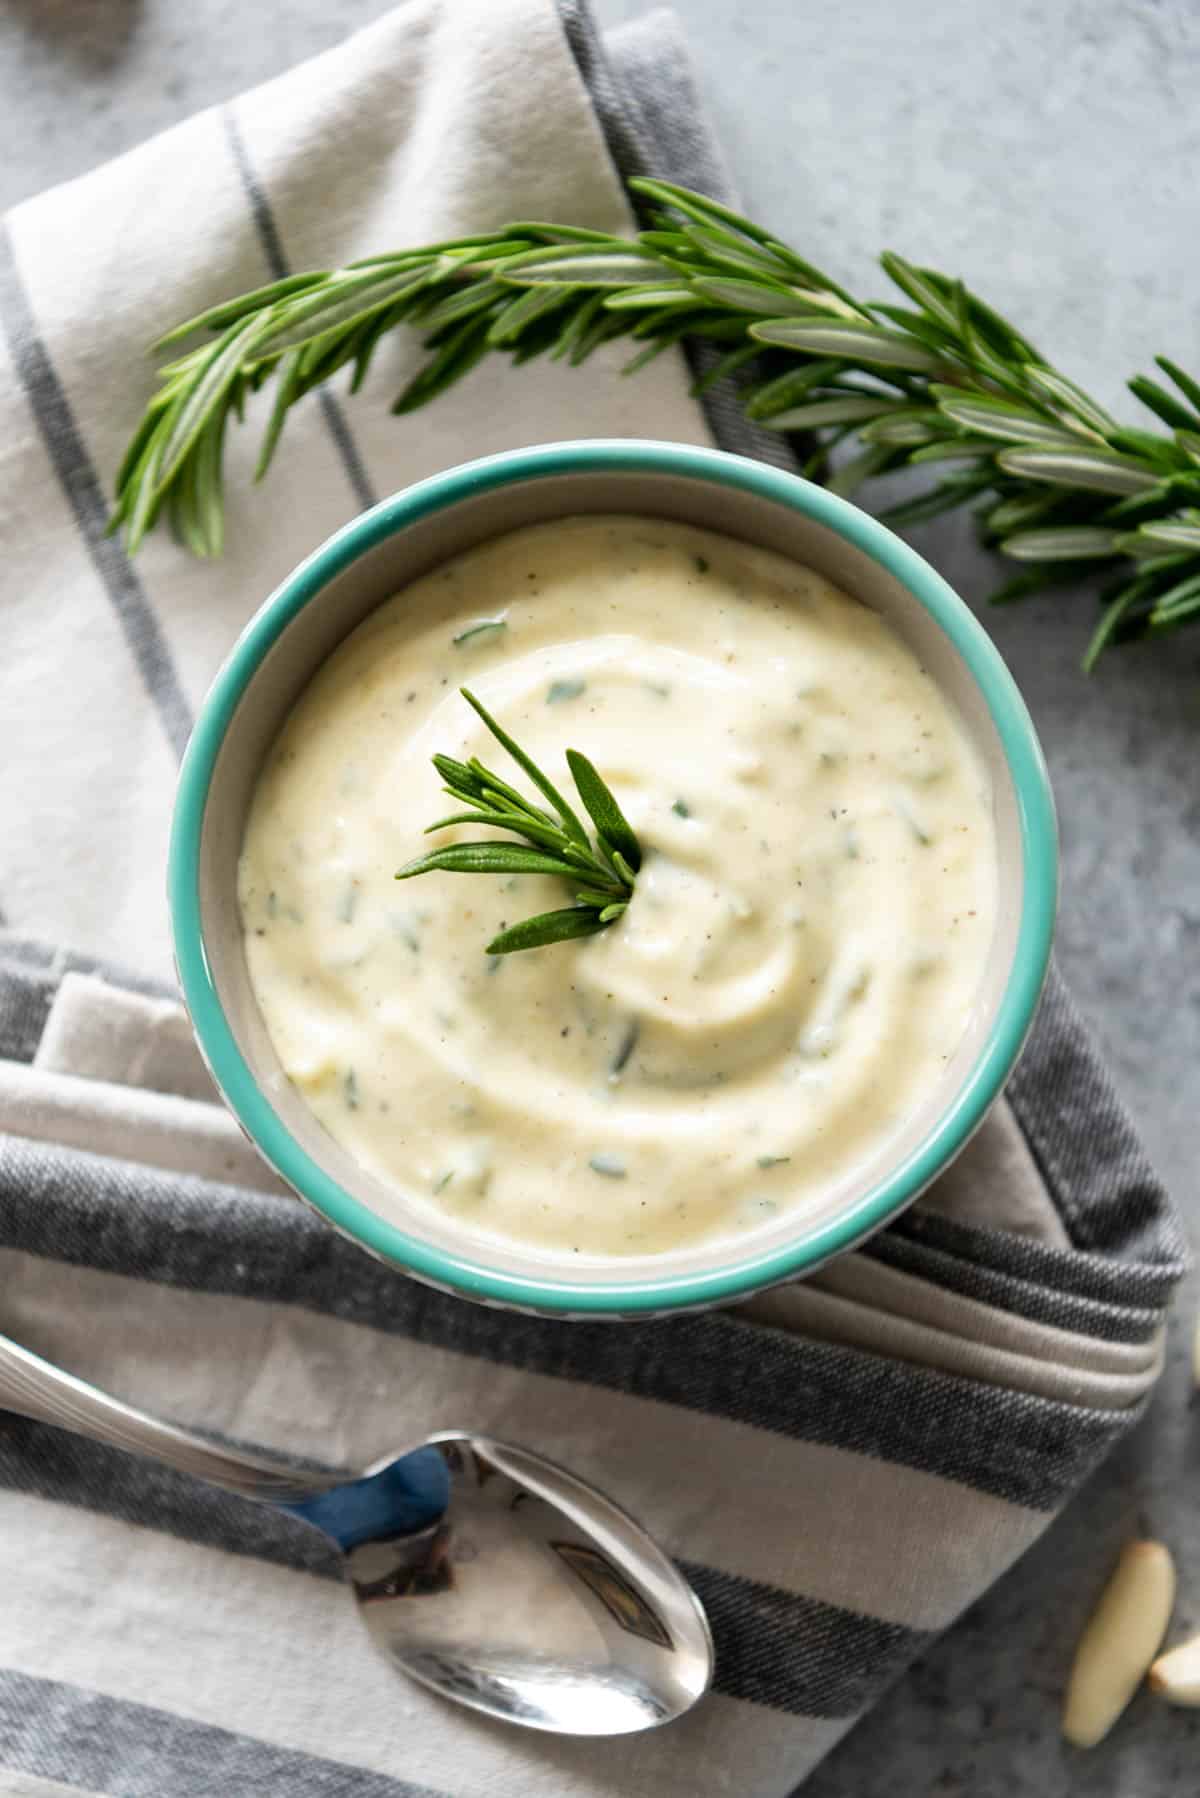 An aerial view of a bowl full of garlic and rosemary aioli on a towel next to a spoon and a sprig of fresh rosemary.